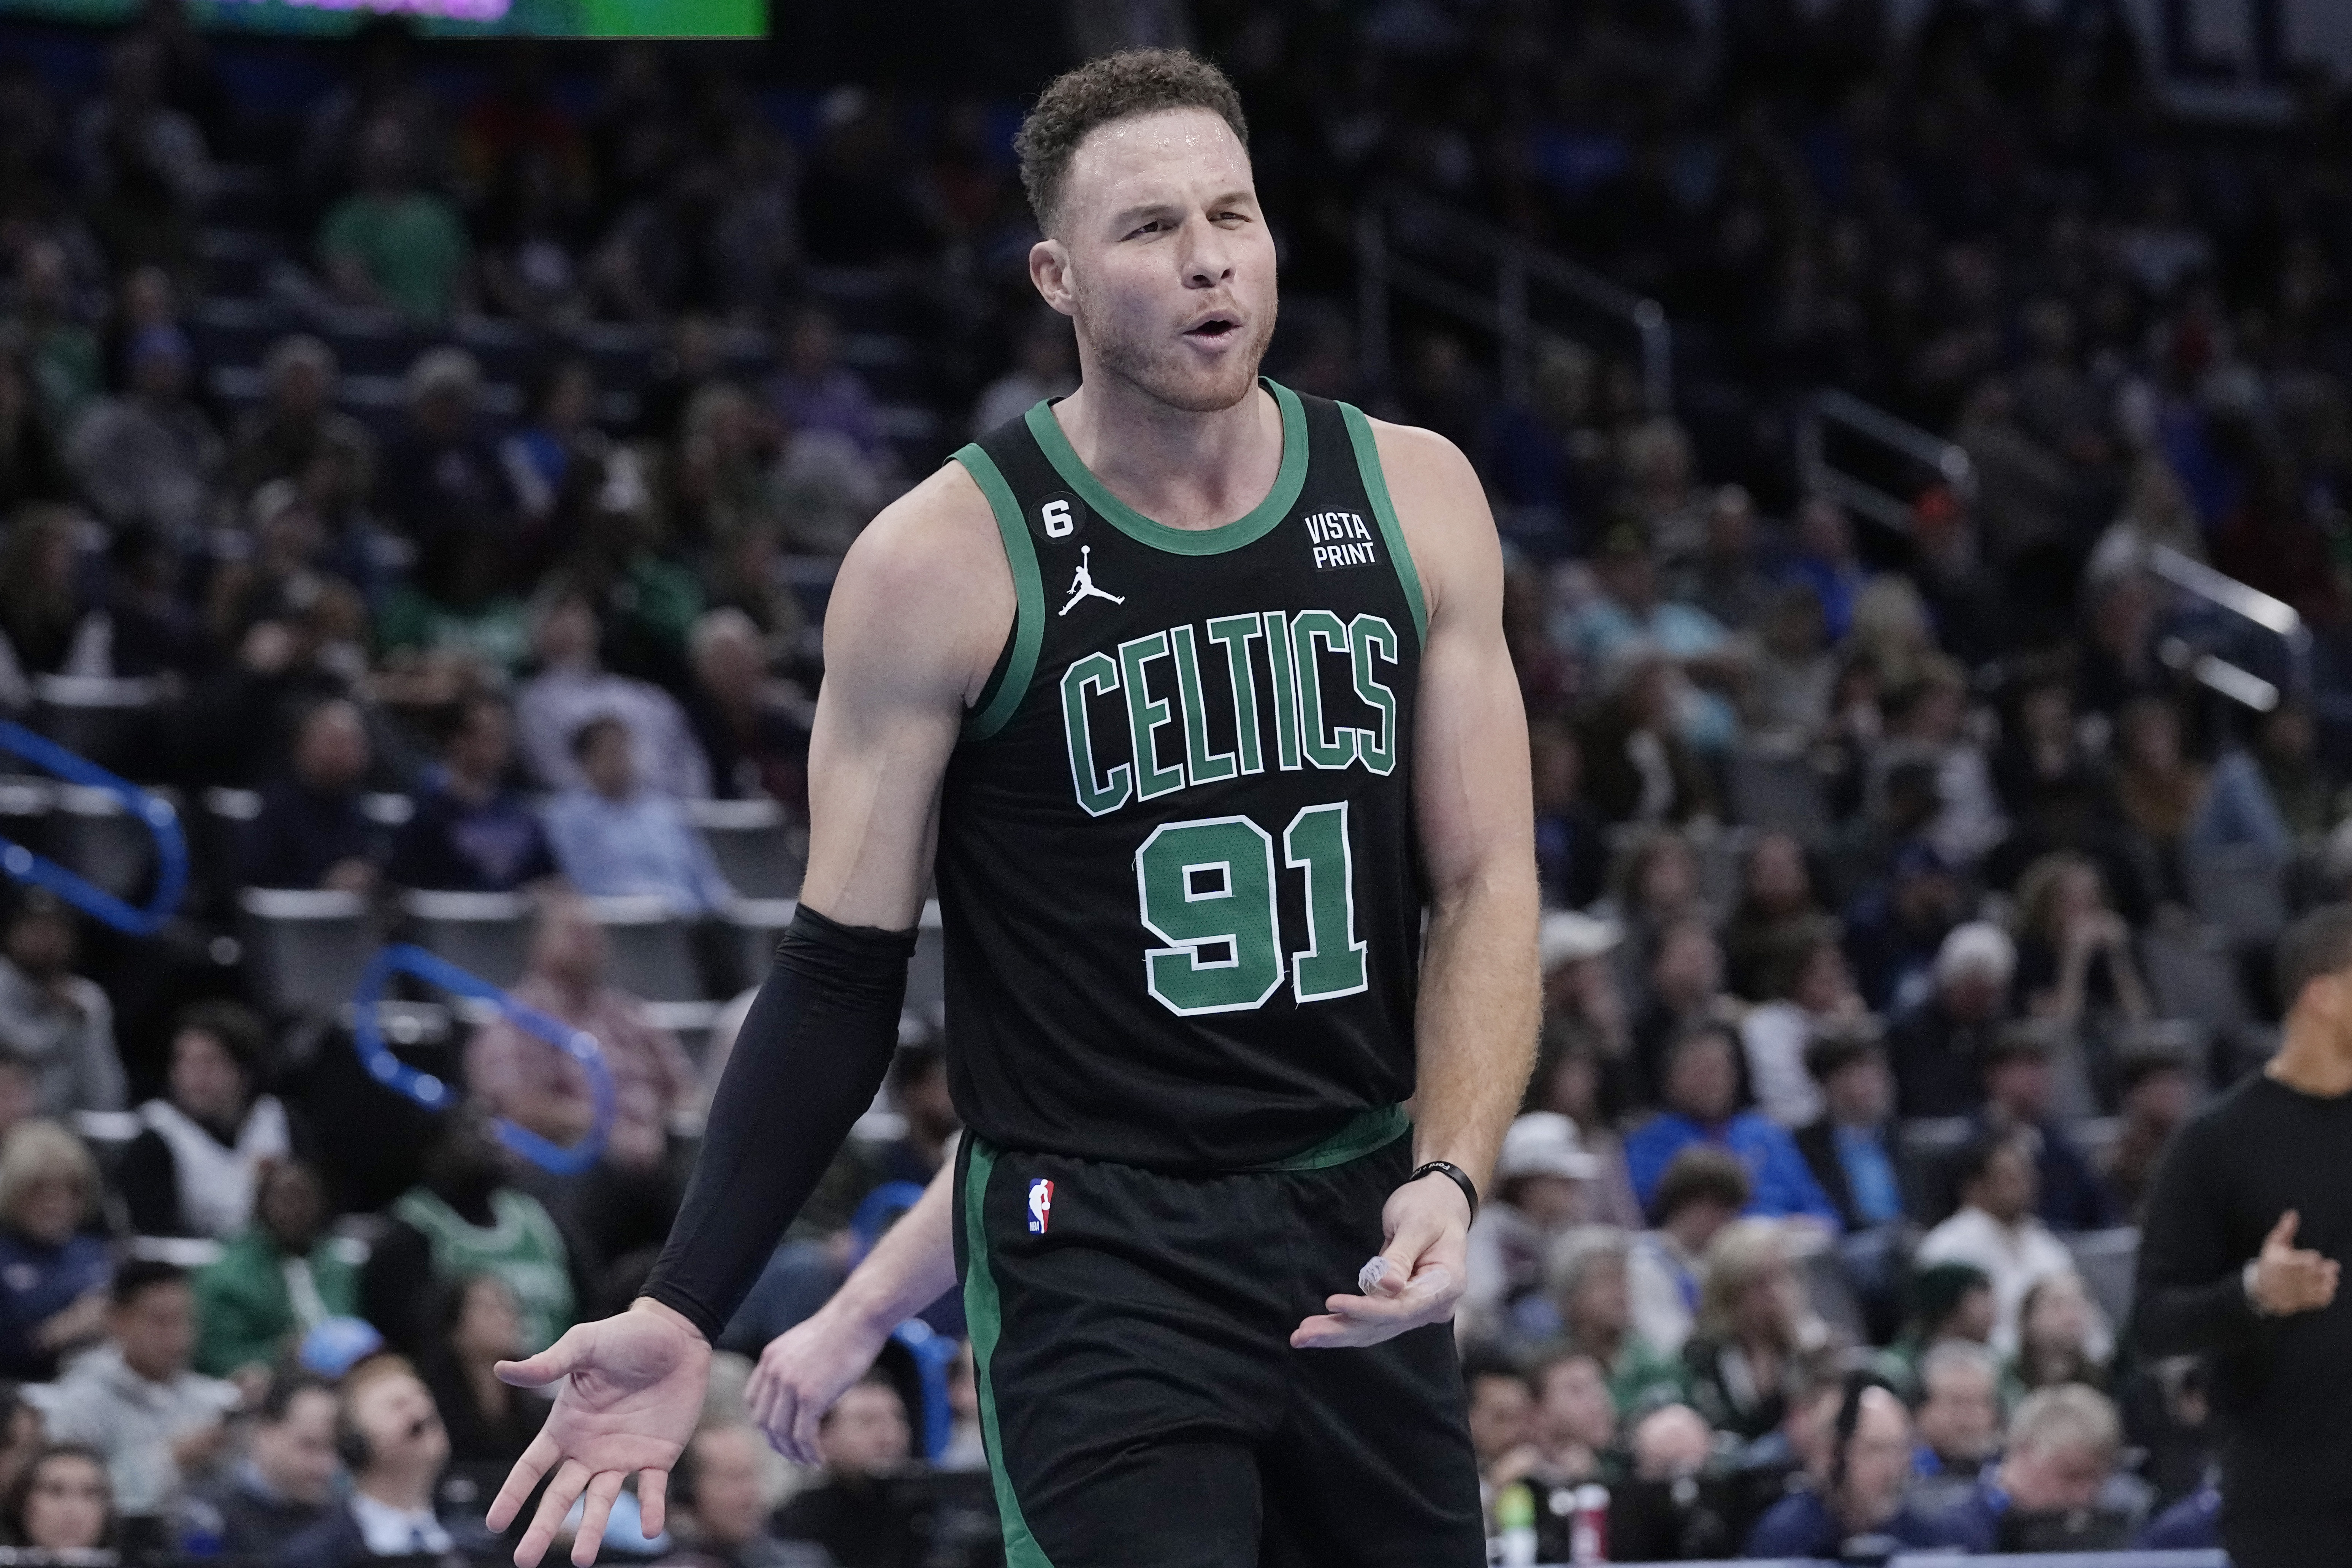 For Celtics big man Blake Griffin, facing the Thunder in Oklahoma